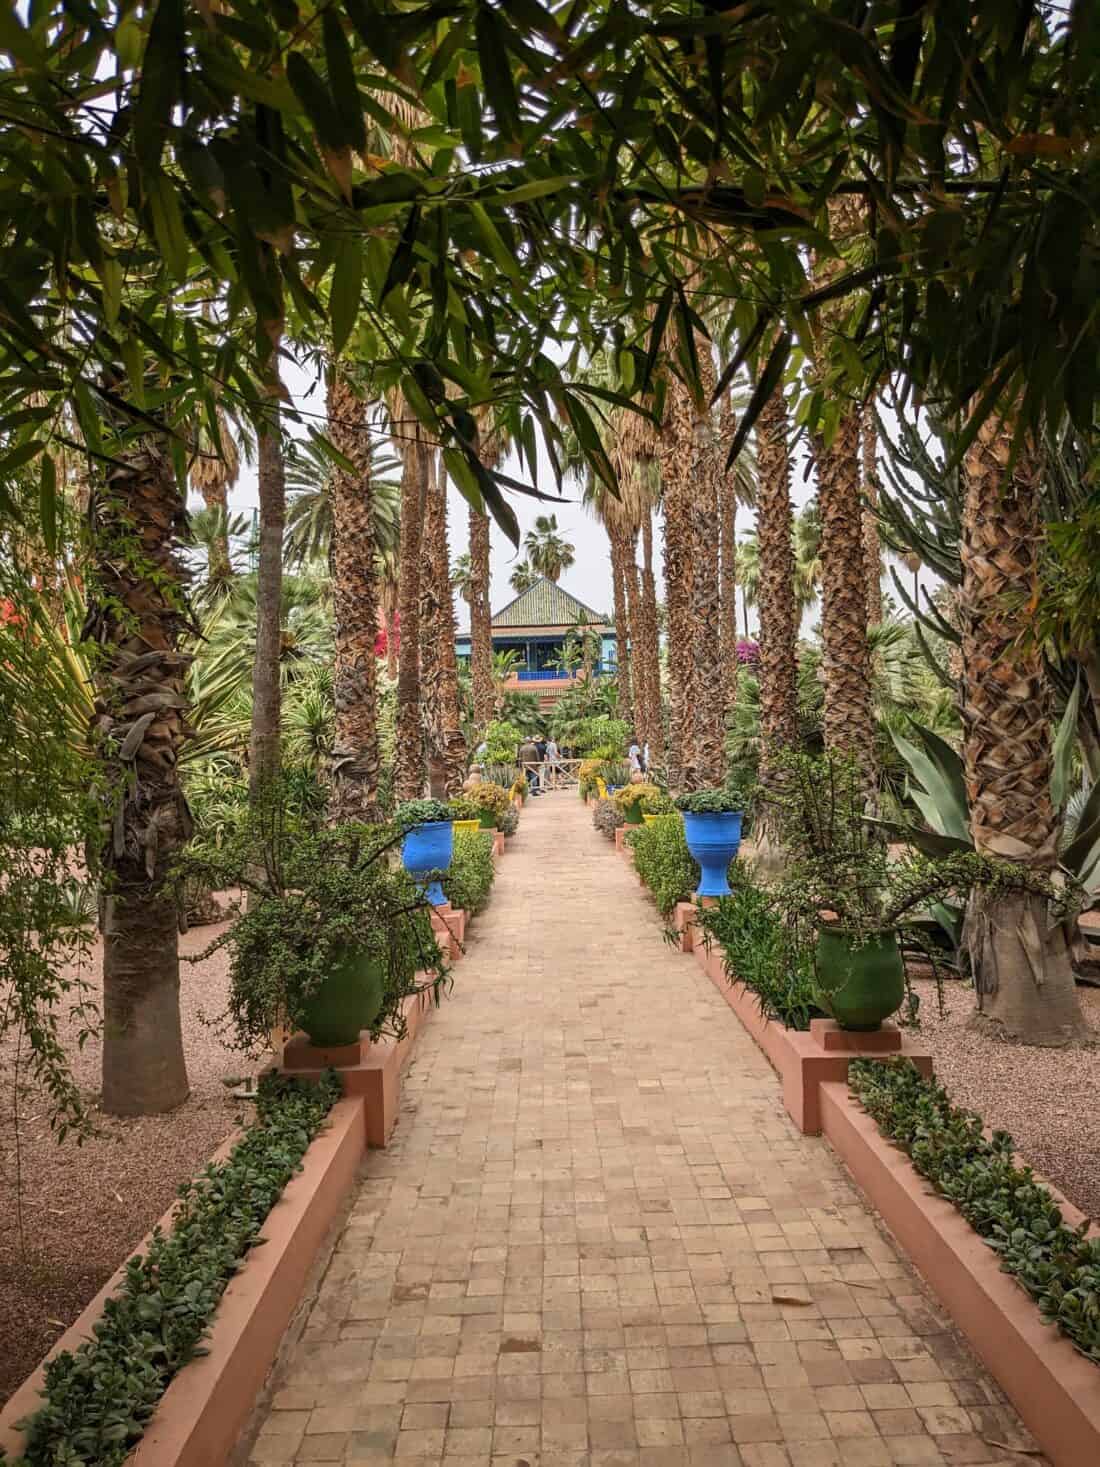 A pathway lined with palm trees and blue planters leading to a building in a garden.